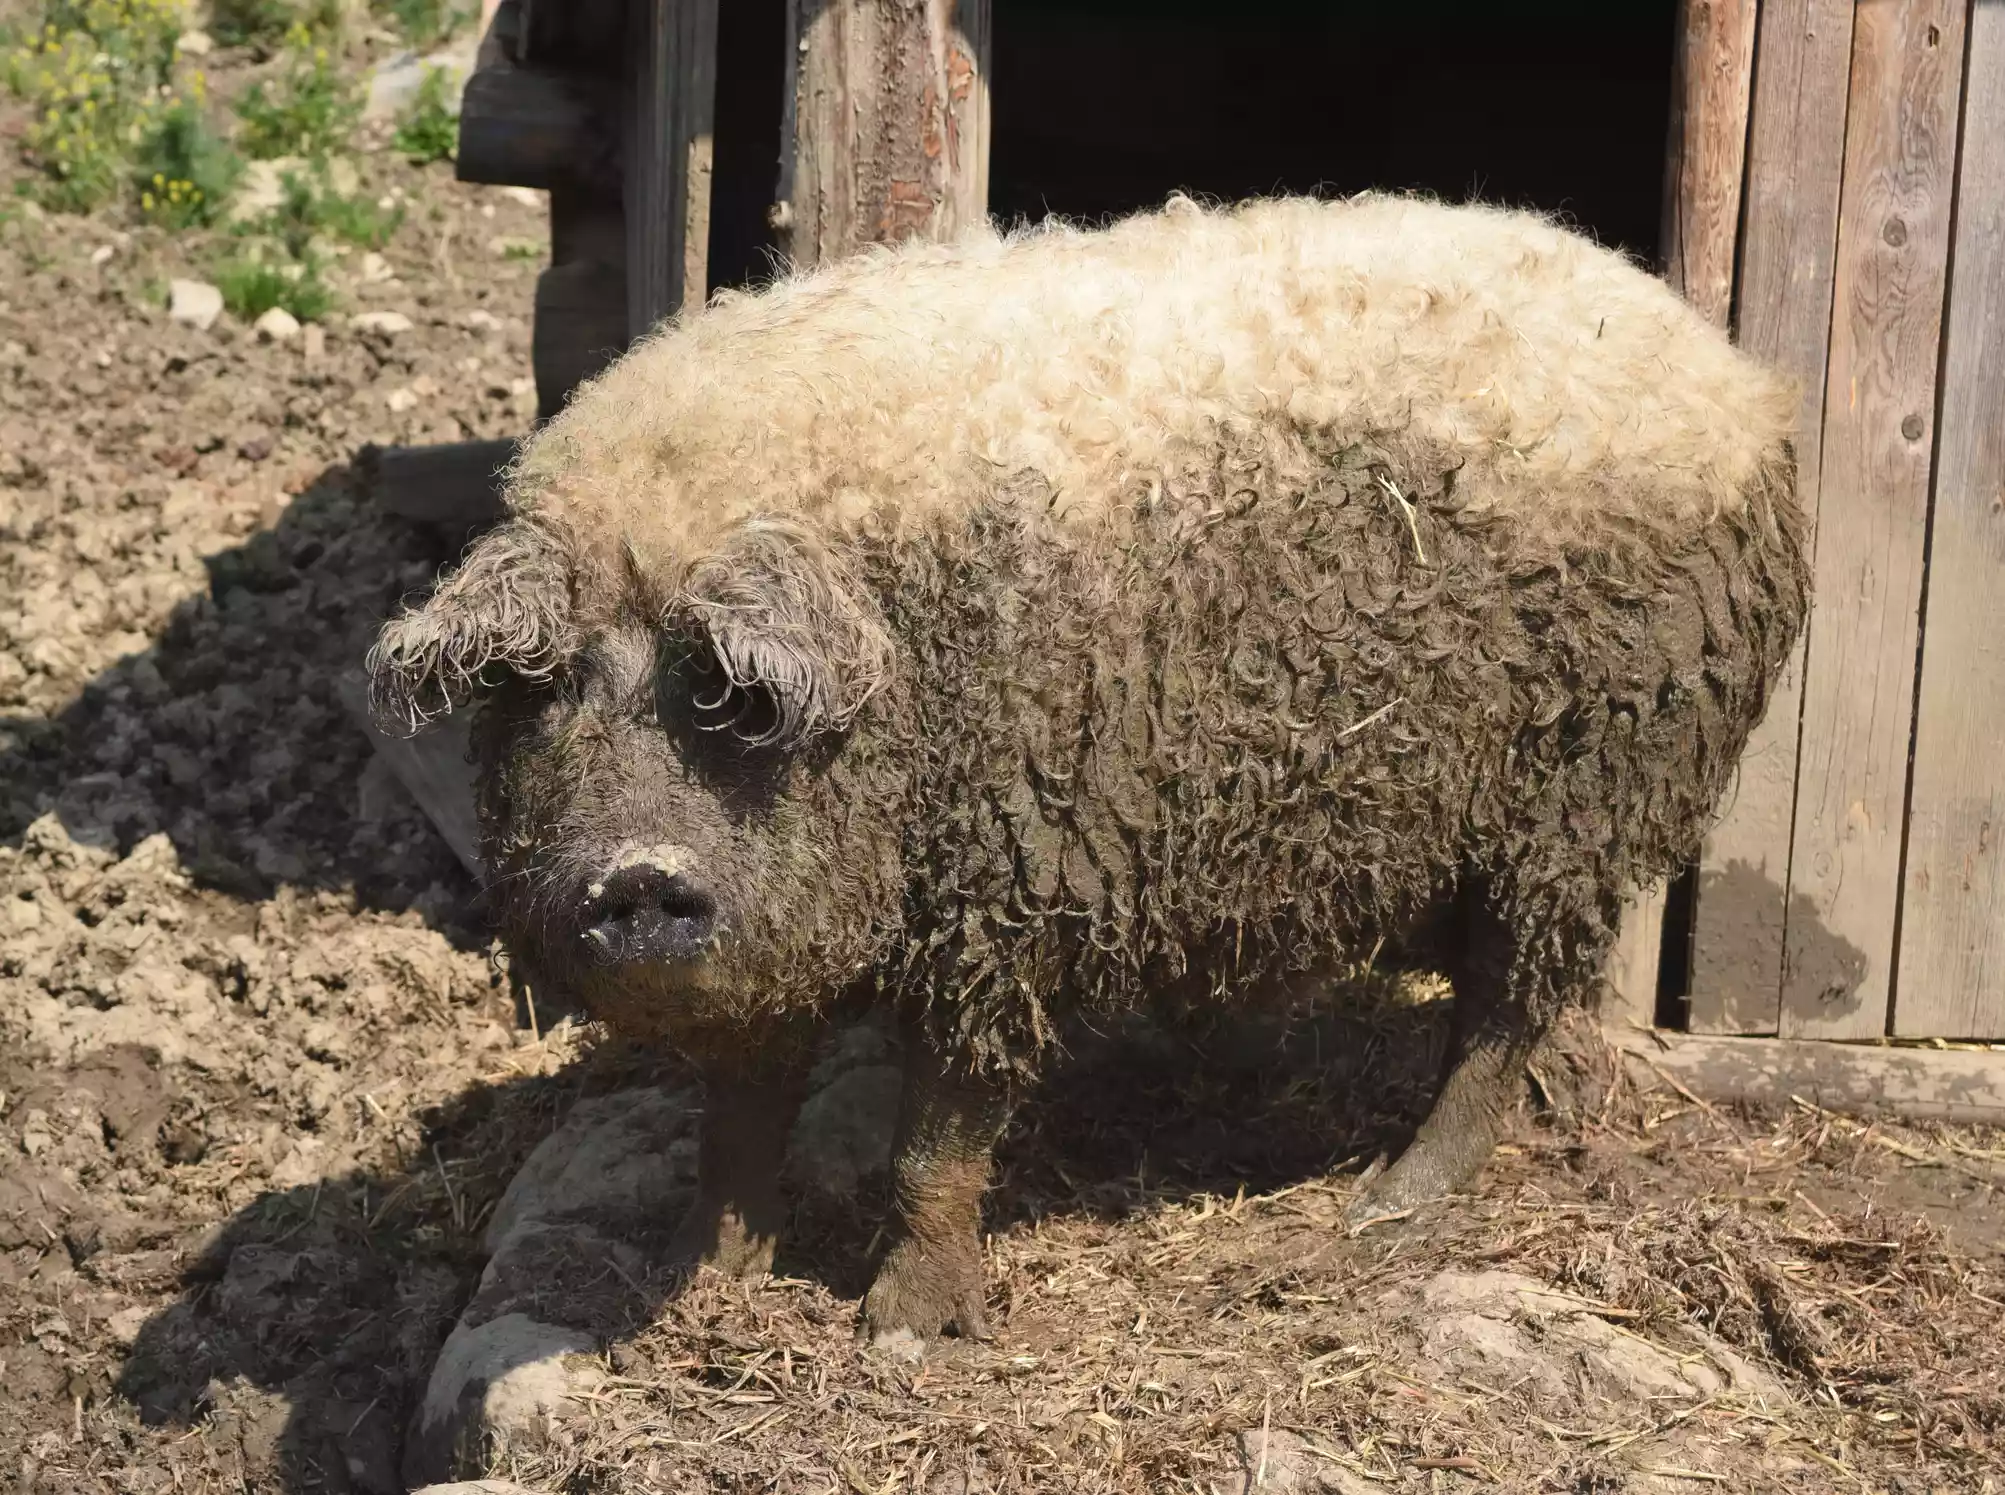 A blonde Mangalica pig covered in mud standing on muddy ground against a wooden building